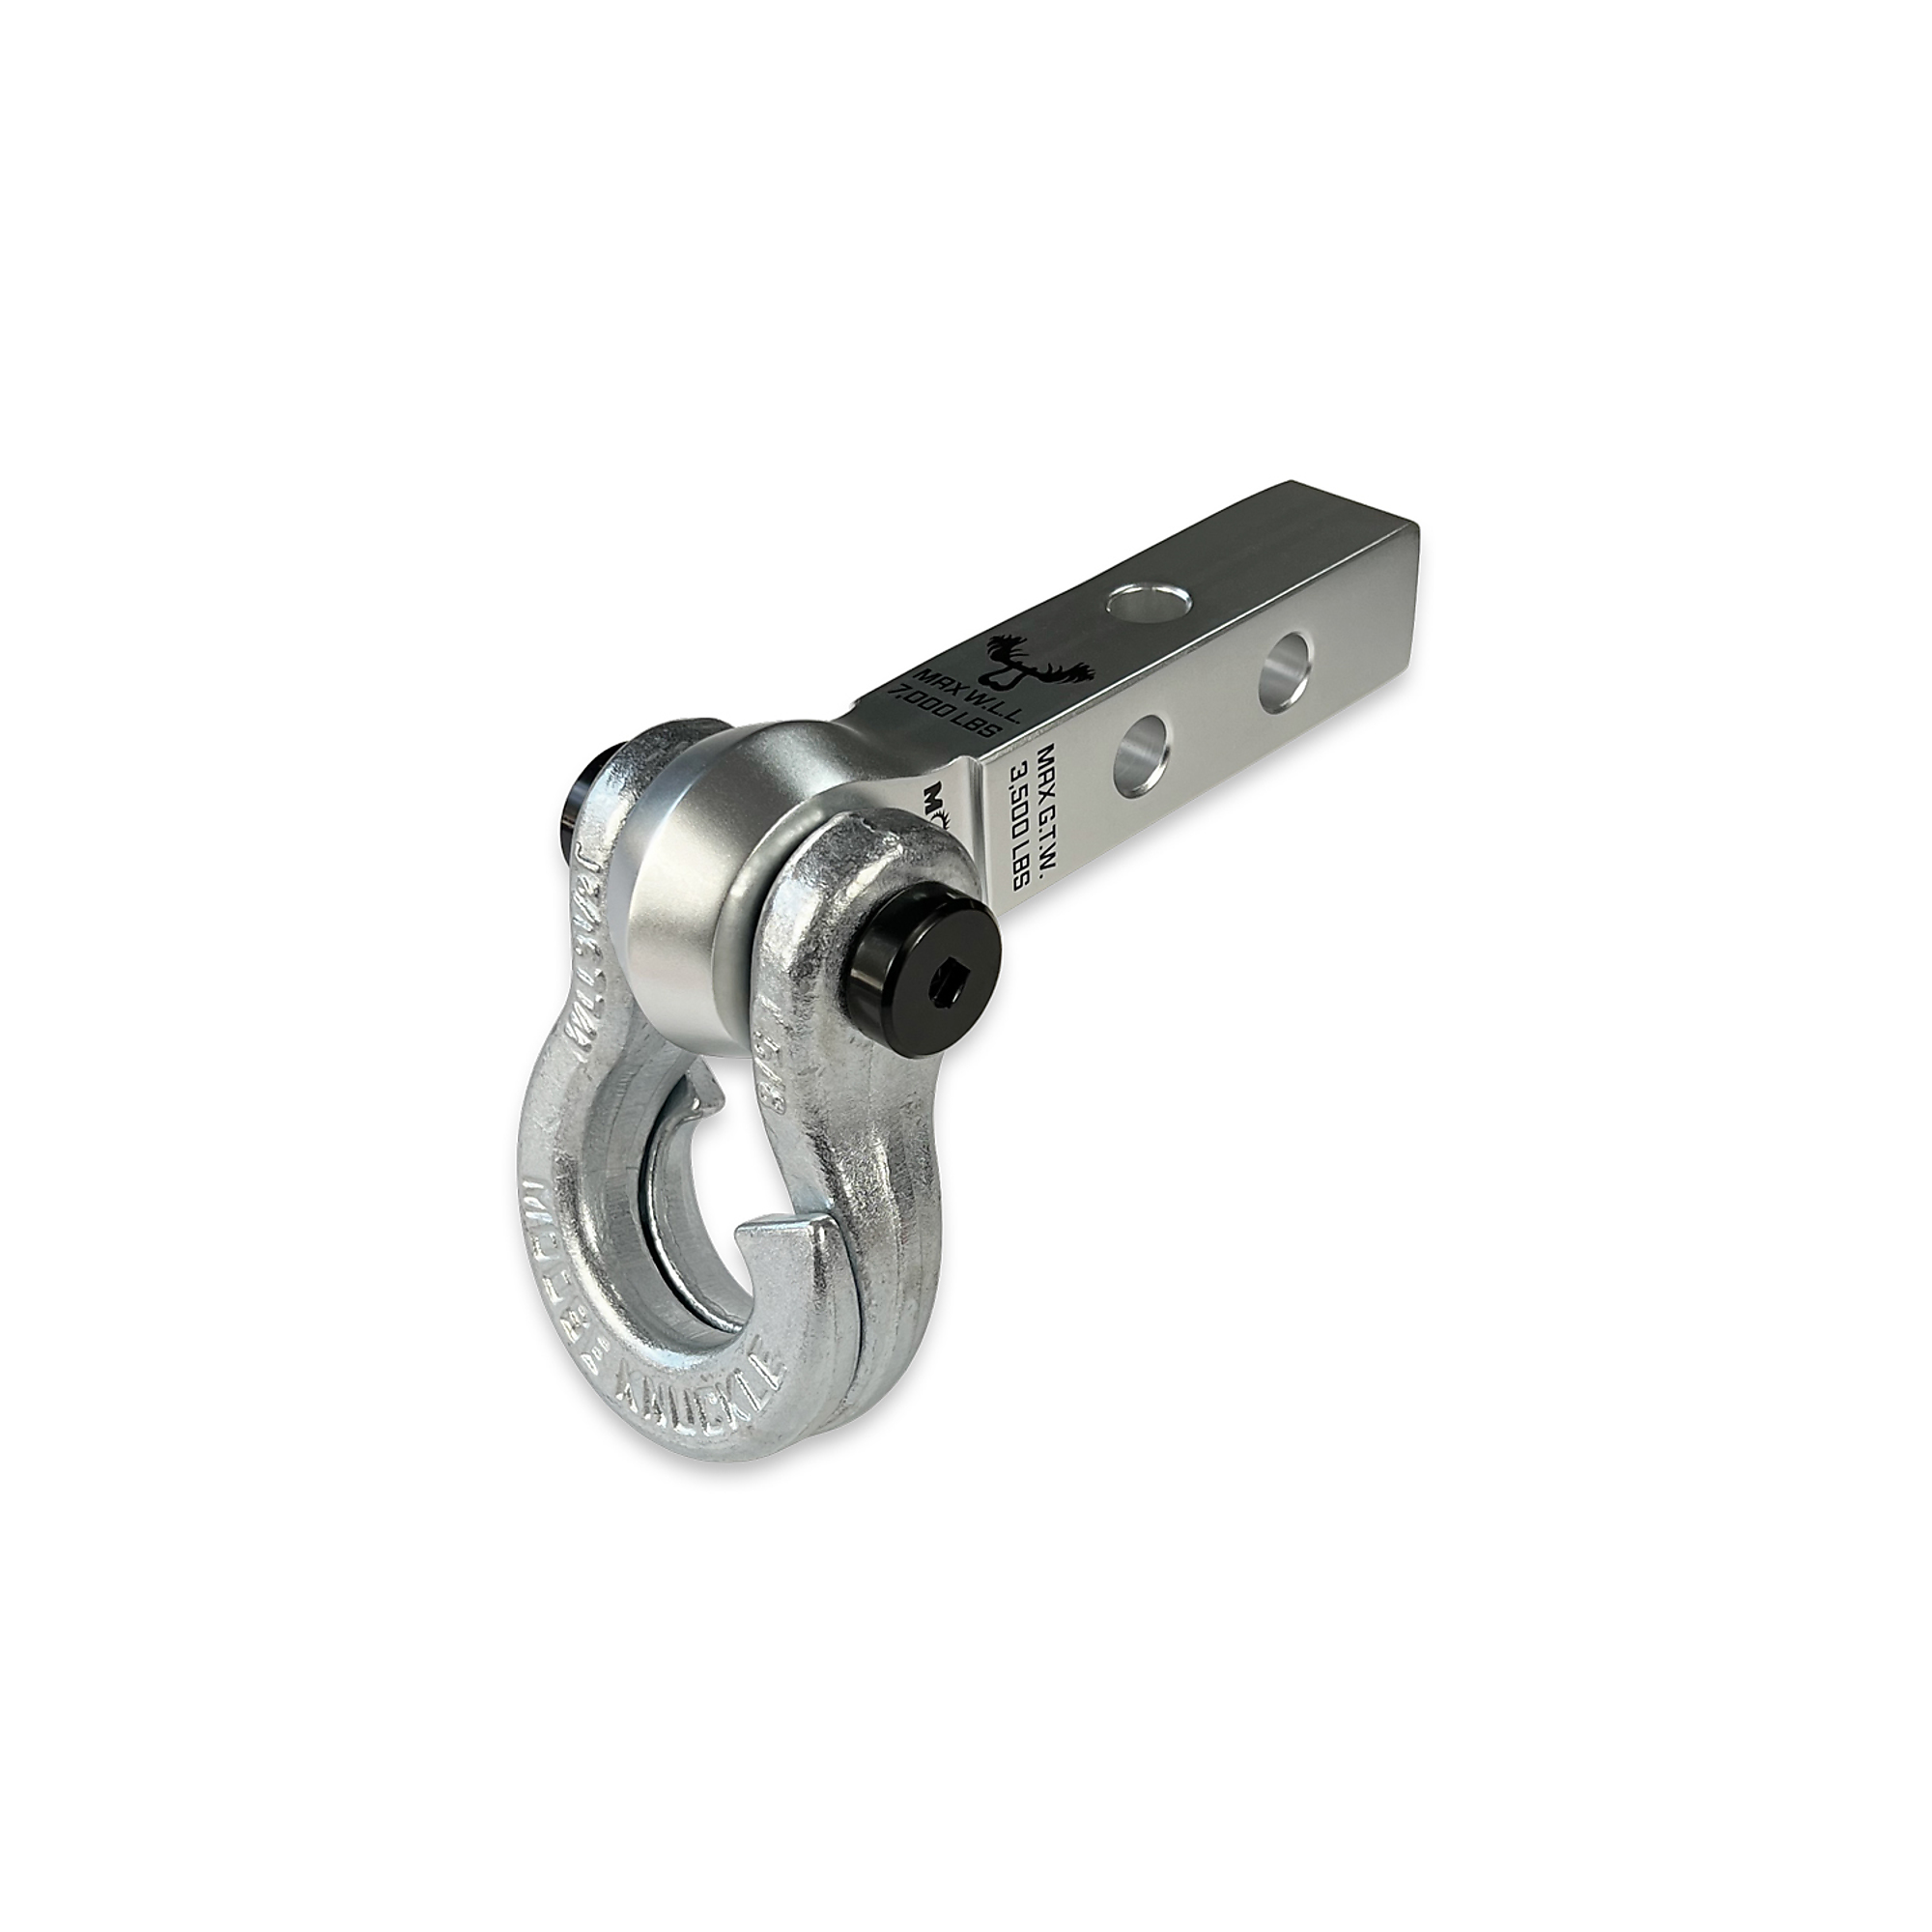 Moose Knuckle Offroad, 5/8 Jowl Split Shackle and Mohawk 1.25 Receiver Combo, Gross Towing Weight 3500 lb, Class Rating Class II, Model FN000043-012